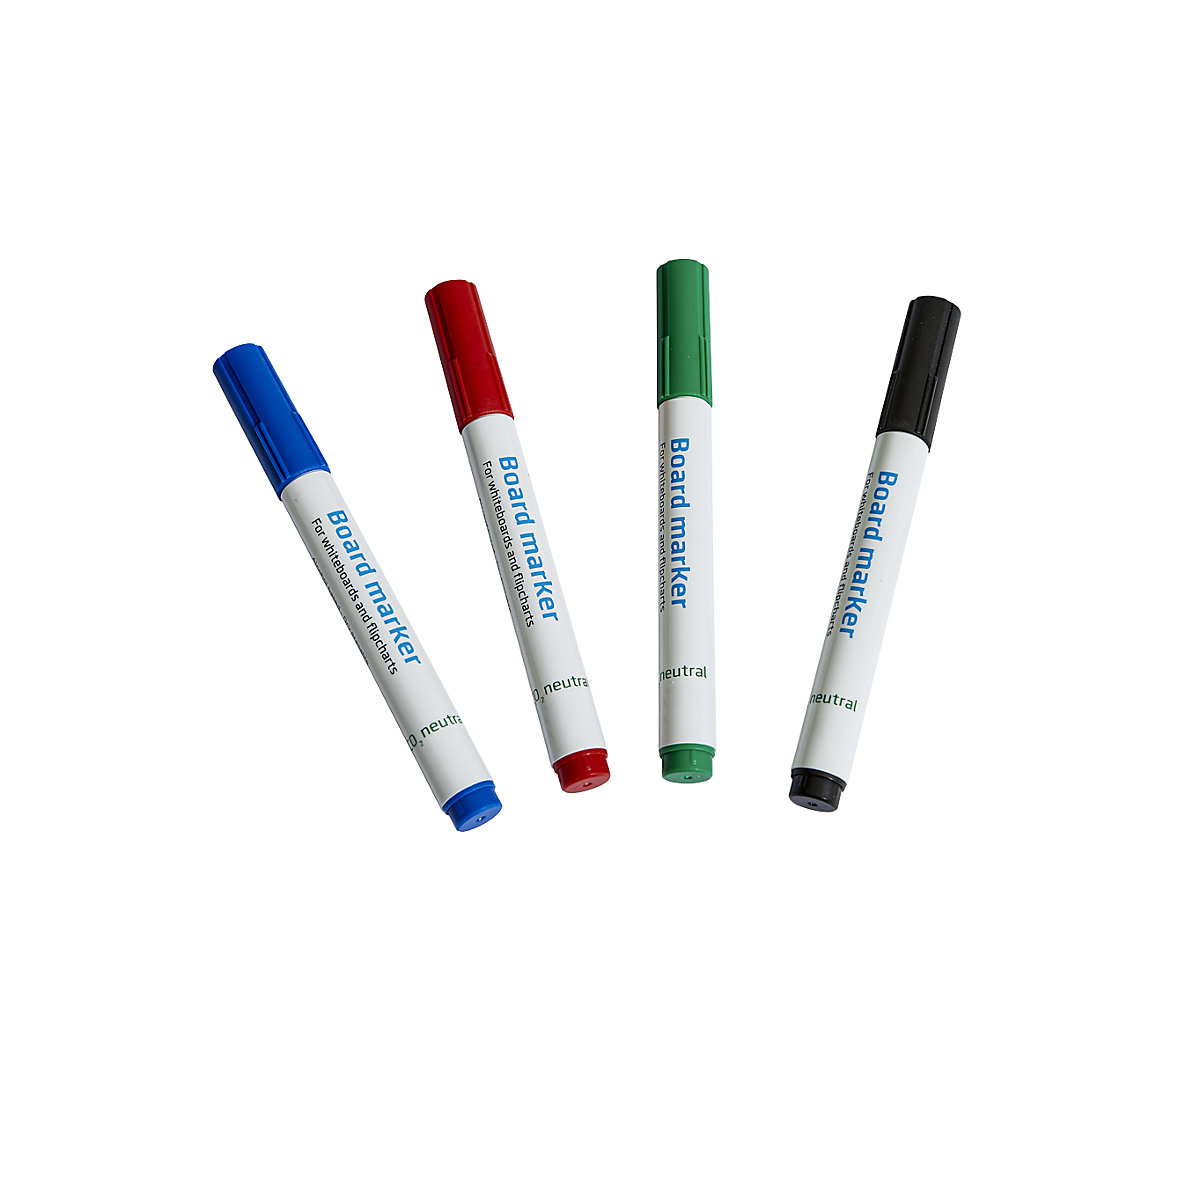 Board and flip-chart marker: colour assortment, blue, red, black